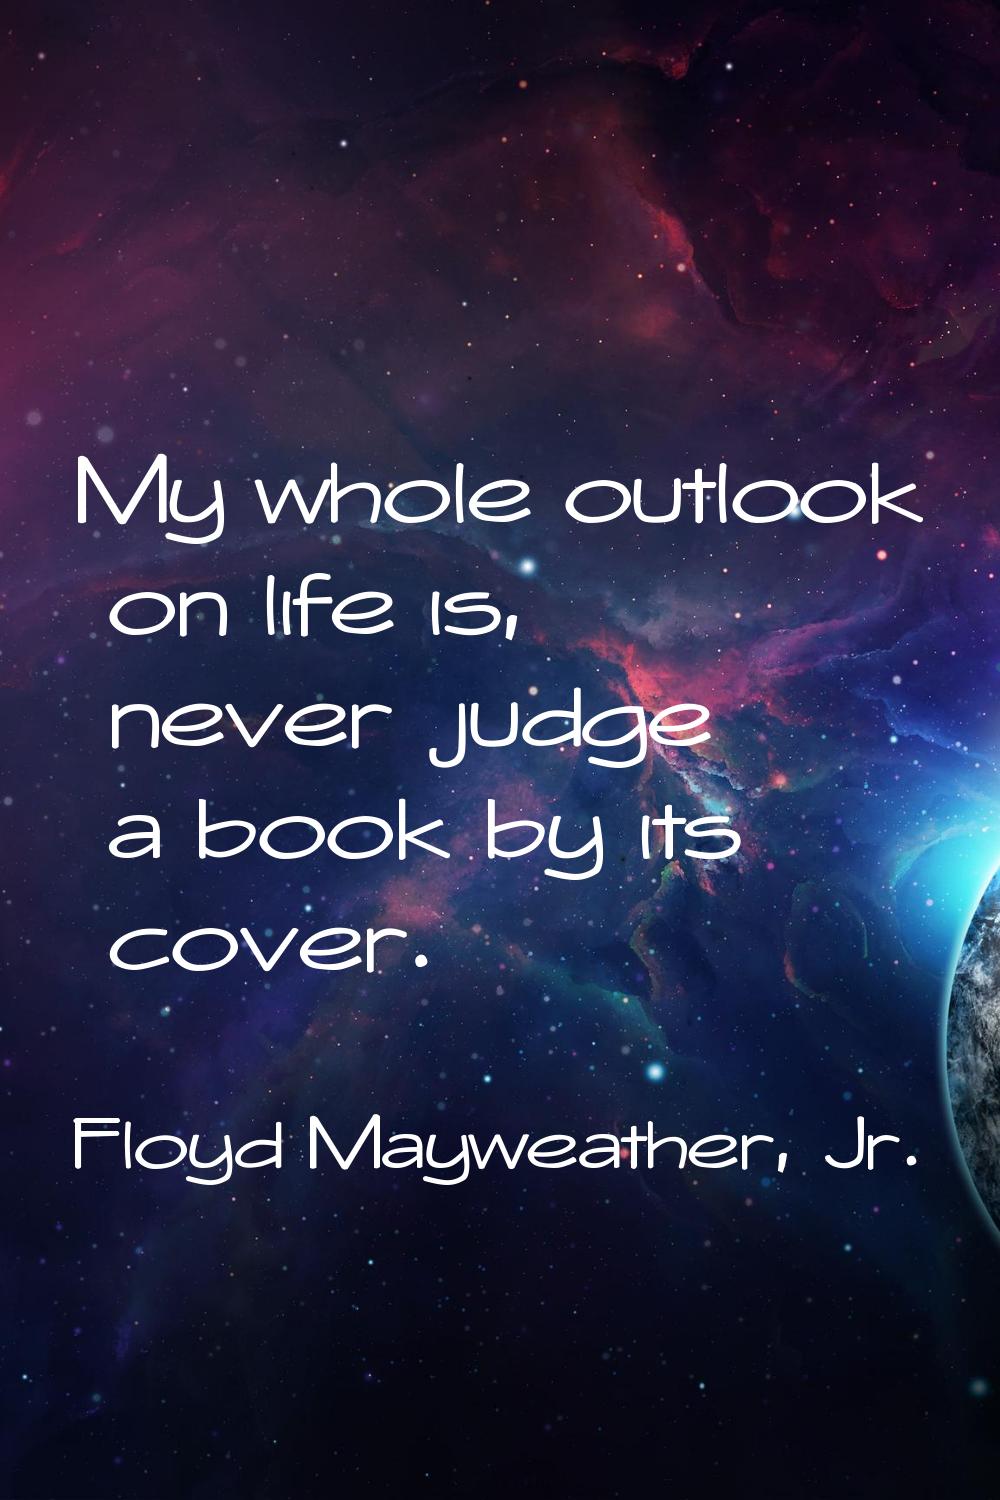 My whole outlook on life is, never judge a book by its cover.